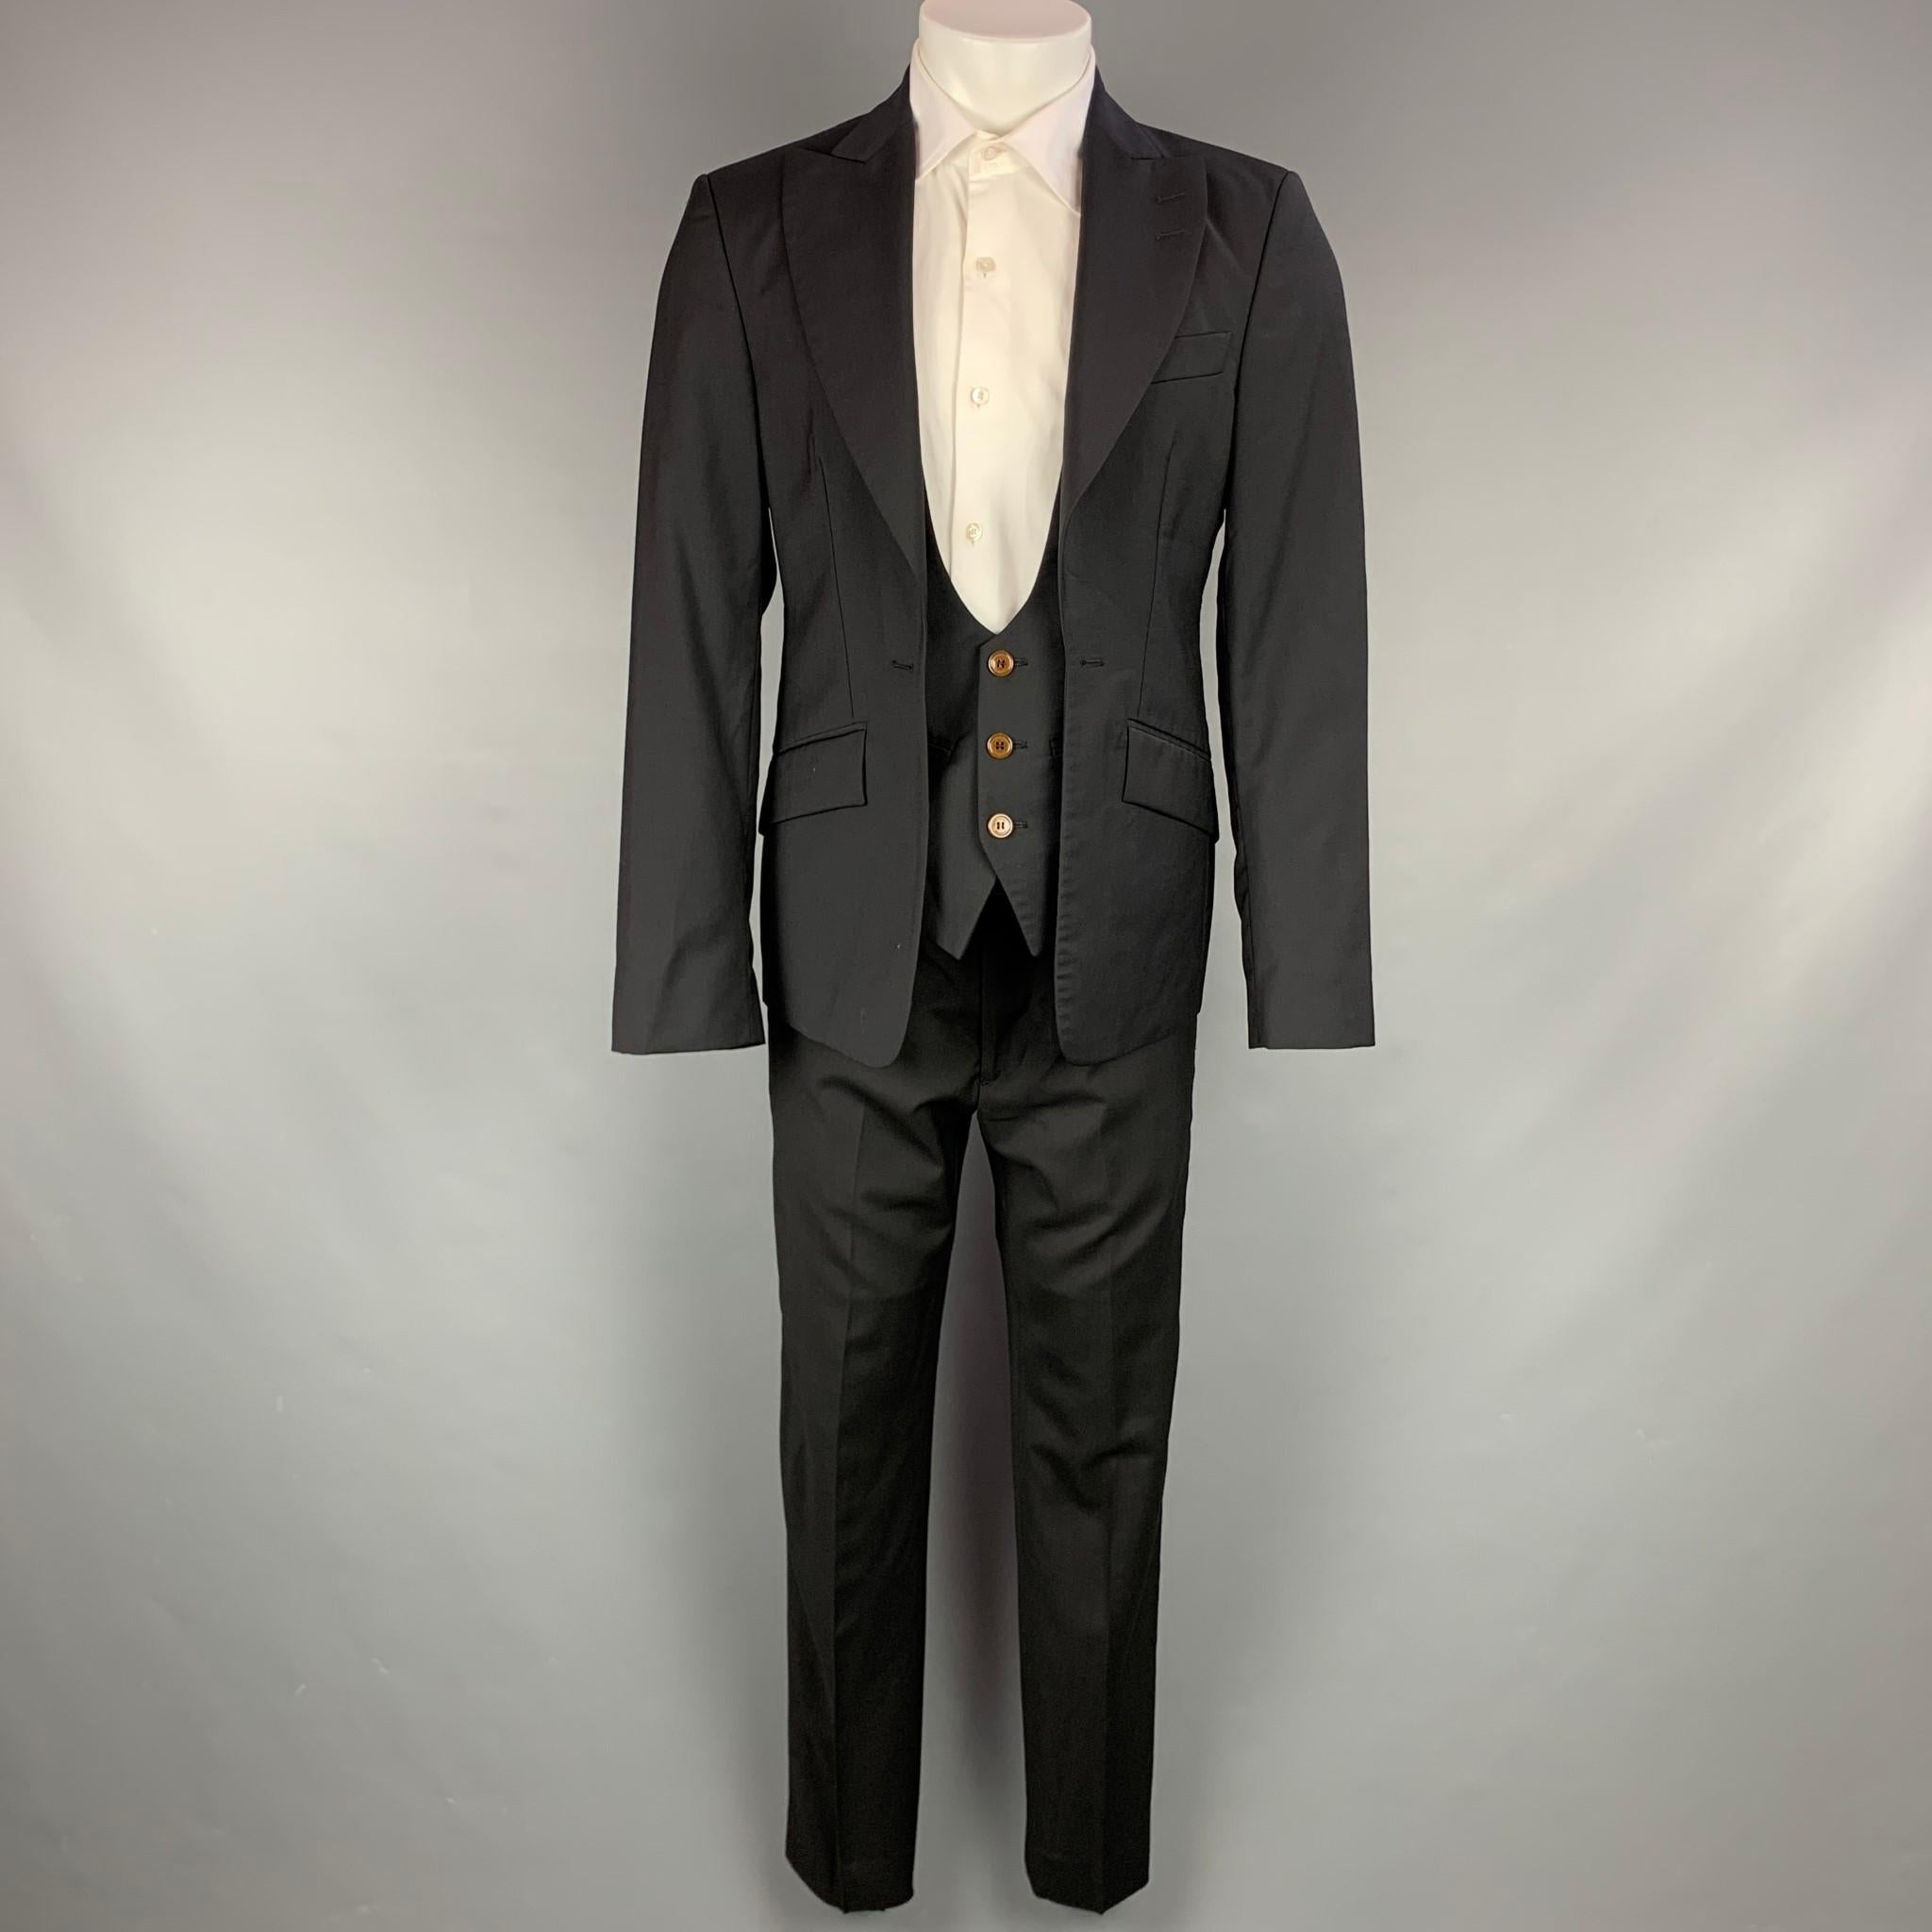 VIVIENNE WESTWOOD MAN suit comes in charcoal grey wool with a full liner and includes a single breasted, simulated vest, buttoned sport coat with peak lapel and matching flat front trousers. Made in Italy.

Very Good Pre-Owned Condition.
Marked: